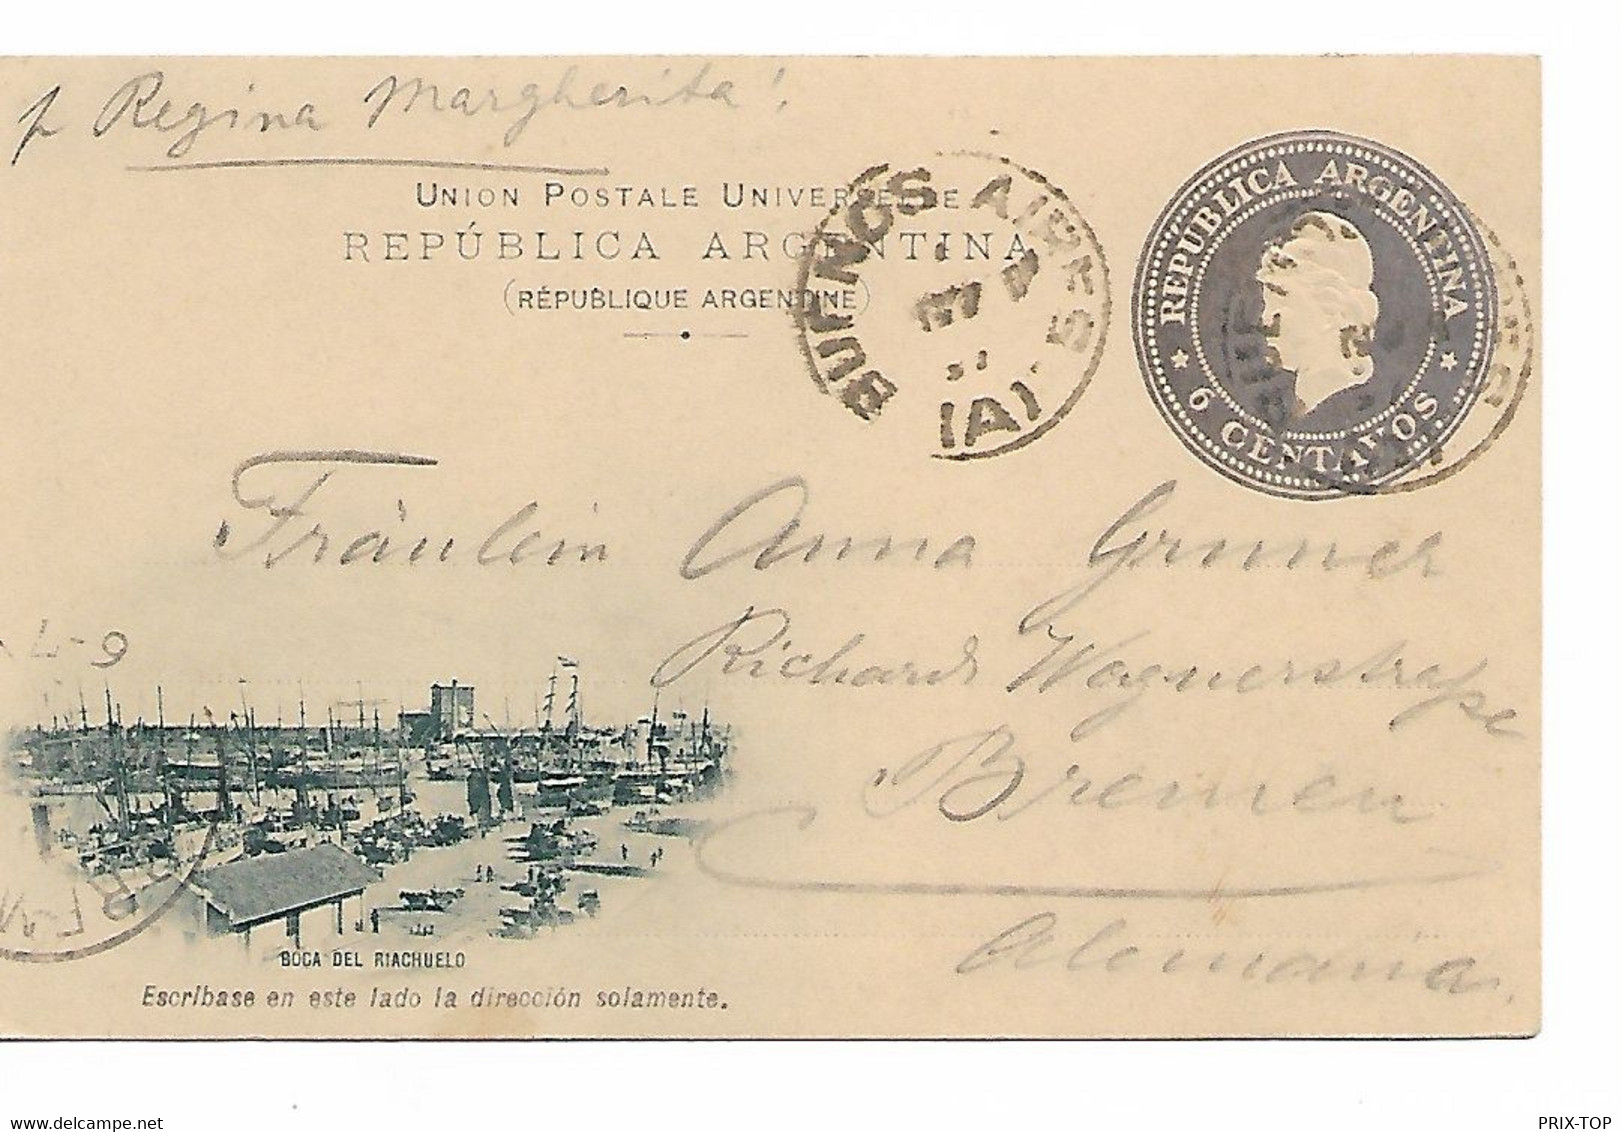 REF4790/ Argentina Postal Stationery Illustrated C. Buenos Aires 1897 > Germany Bremen Arrival Cancellation - Lettres & Documents